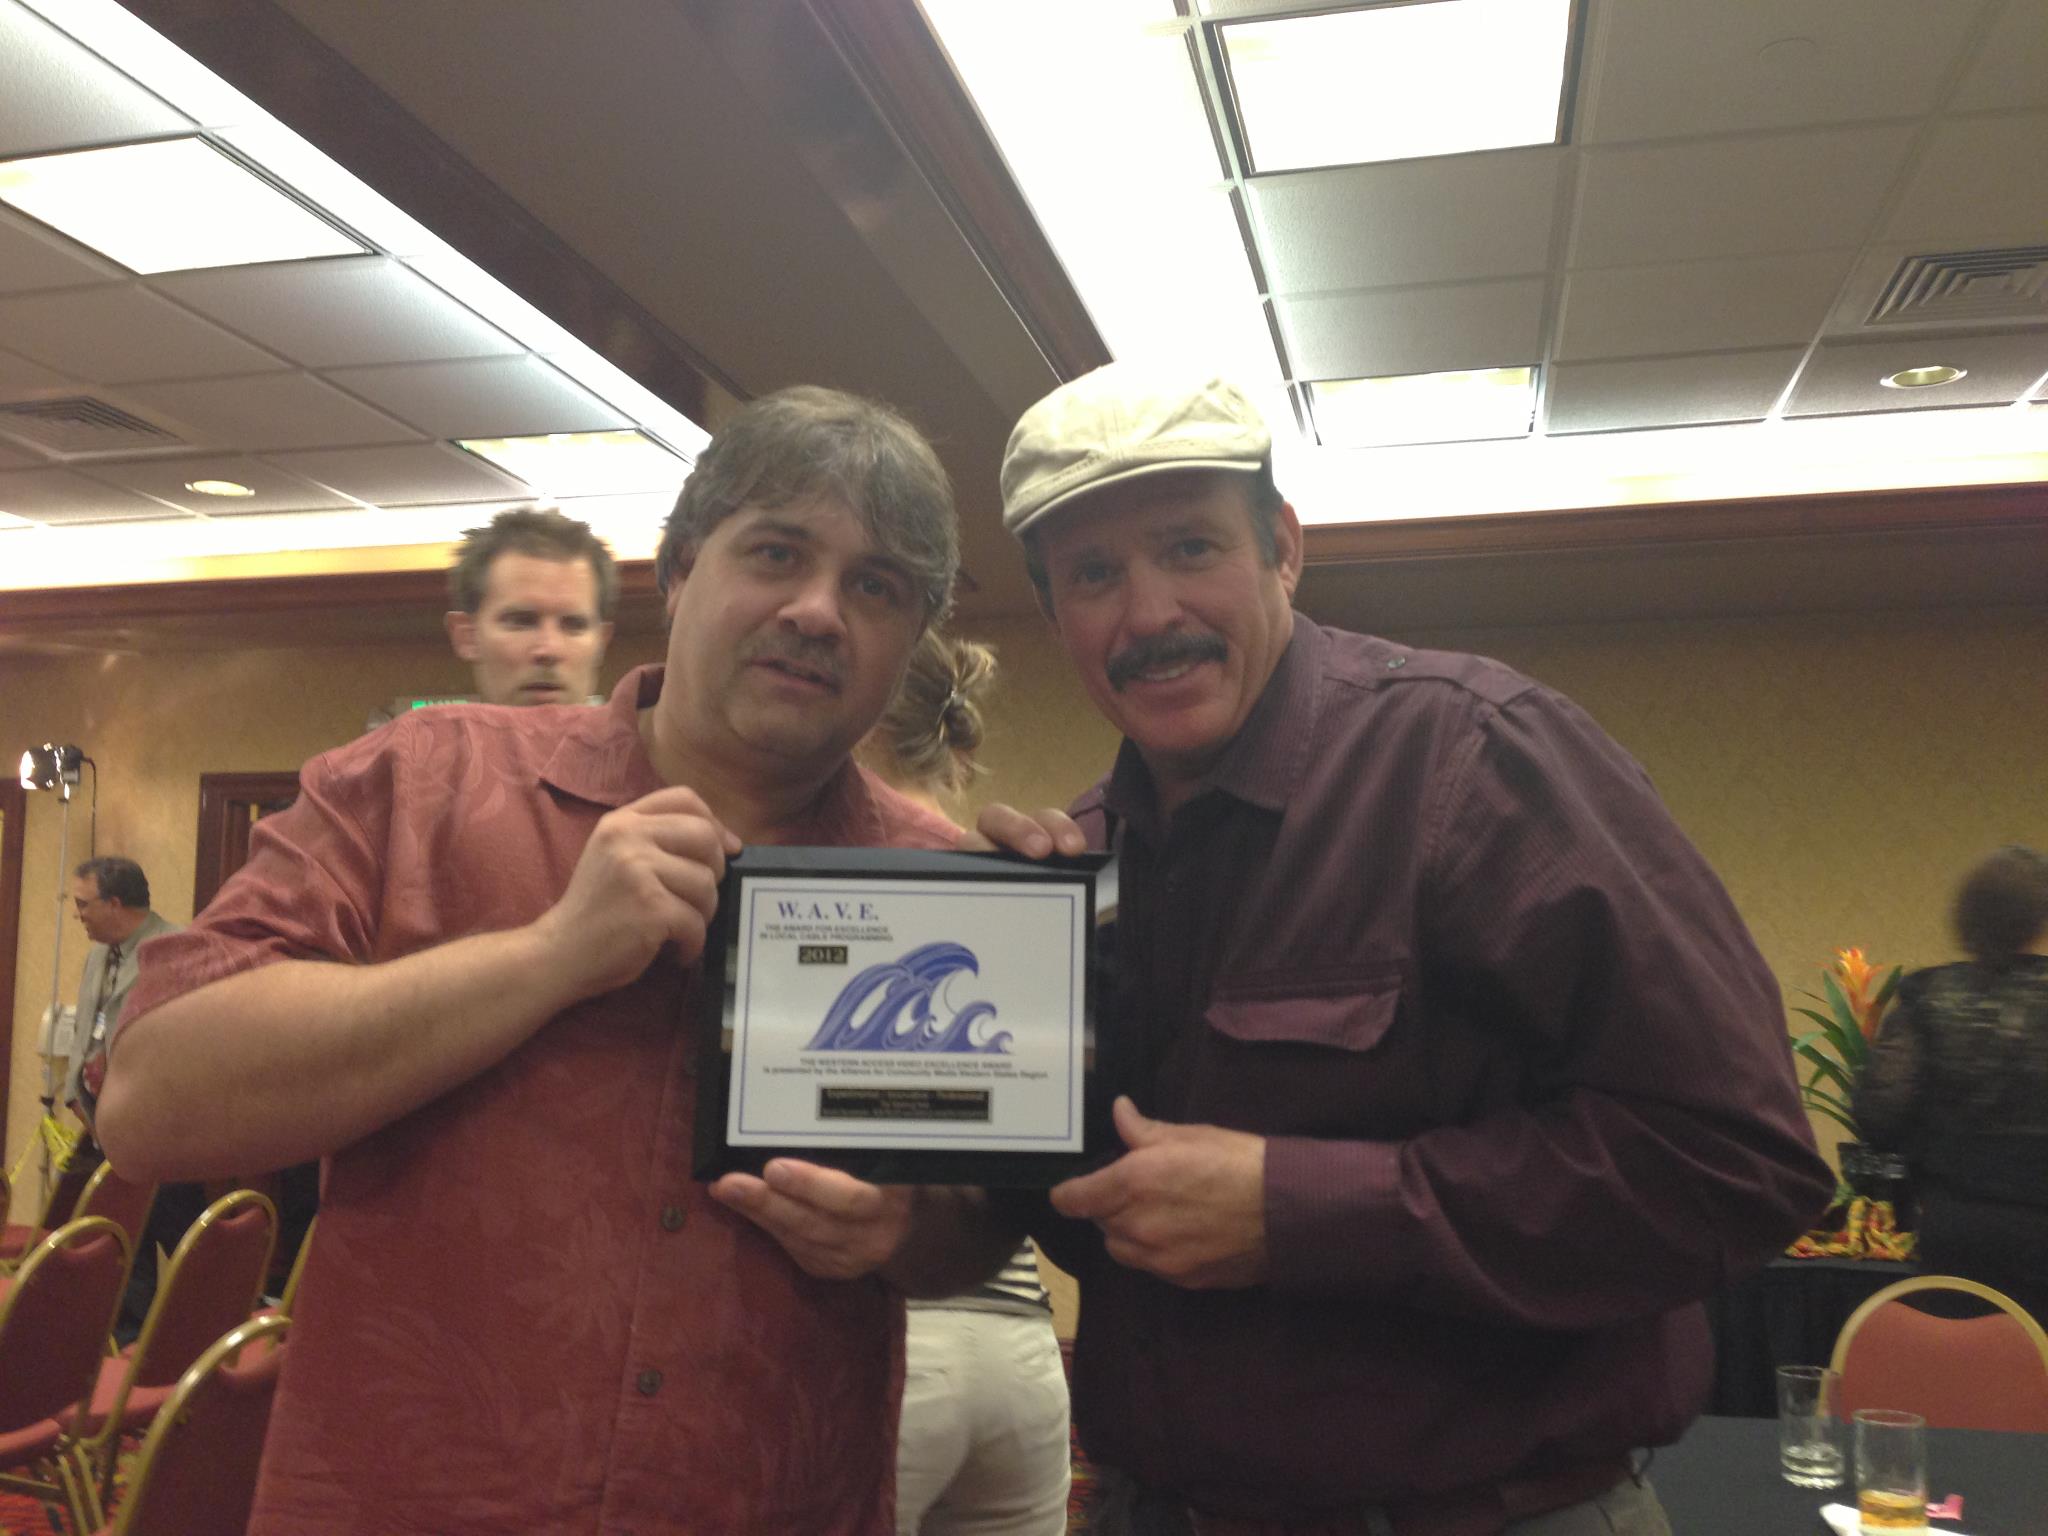 Gerald Martin Davenport and Rob Tillitz holding a WAVE Award for the WATERING hole.